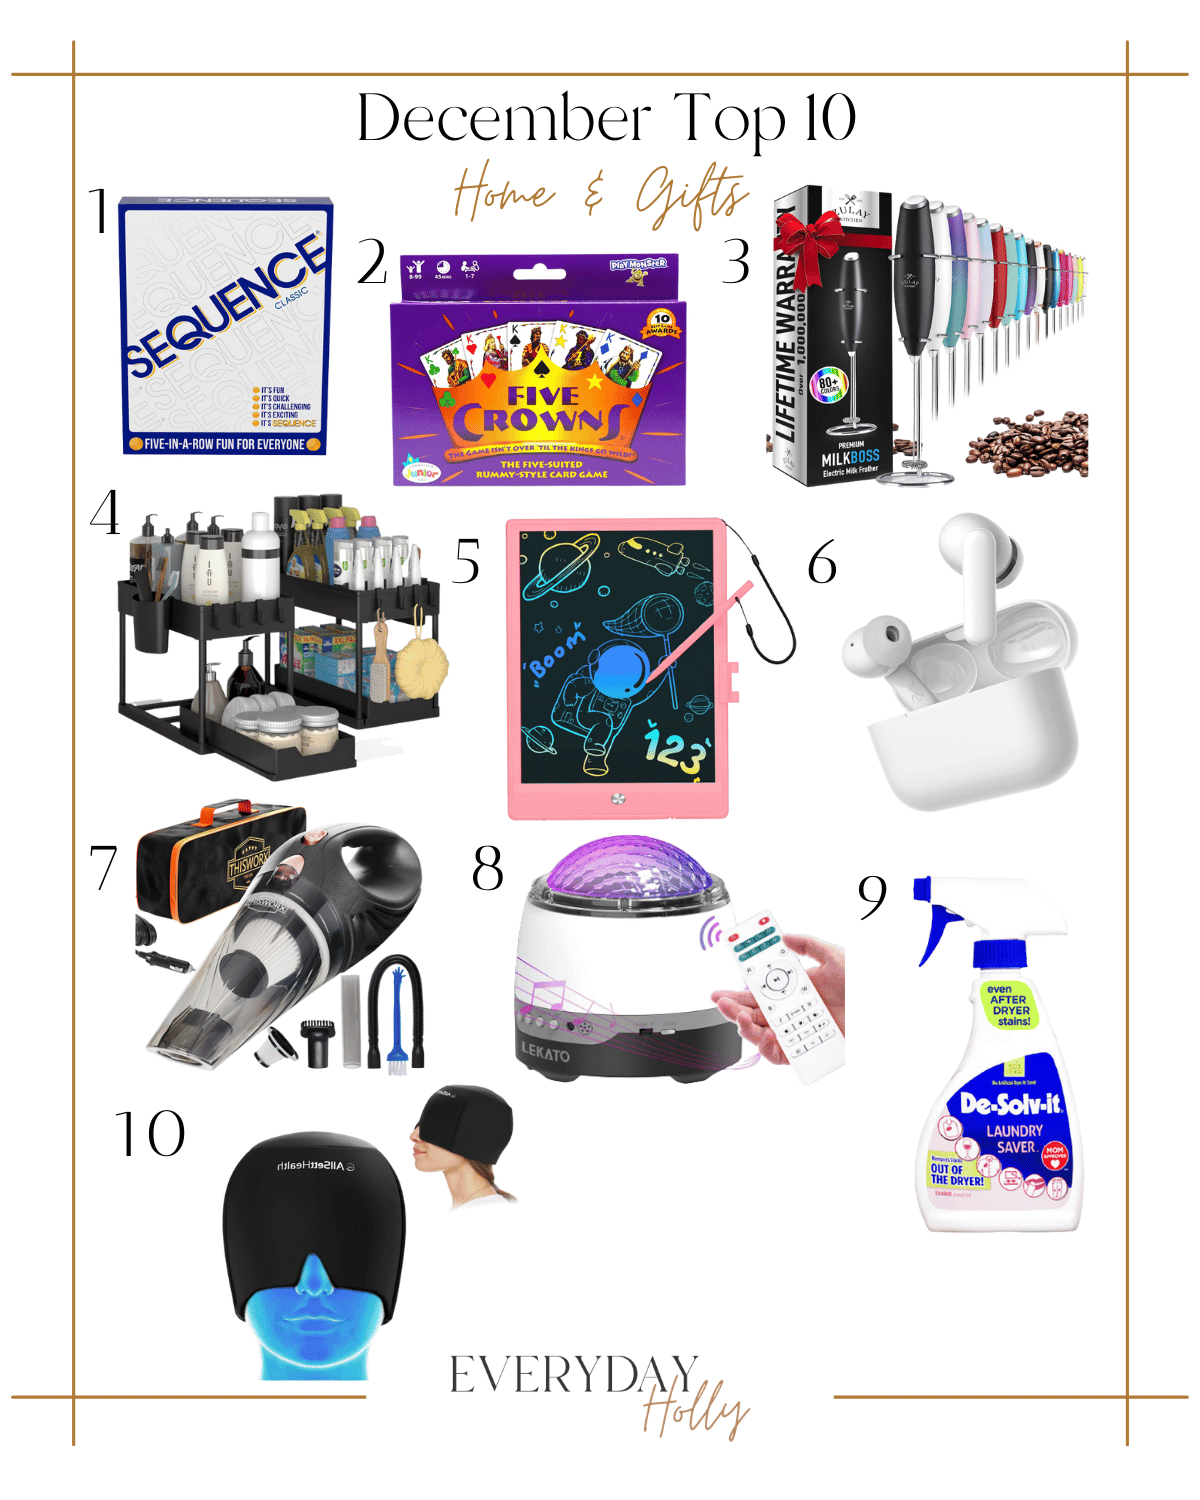 top 10 home items, sequence card game, five crowns game, milk frother, undersink organizer, kids drawing tablet, wireless headphones, car vacuum, led galaxy projector light, stain remover, migraine head wrap 